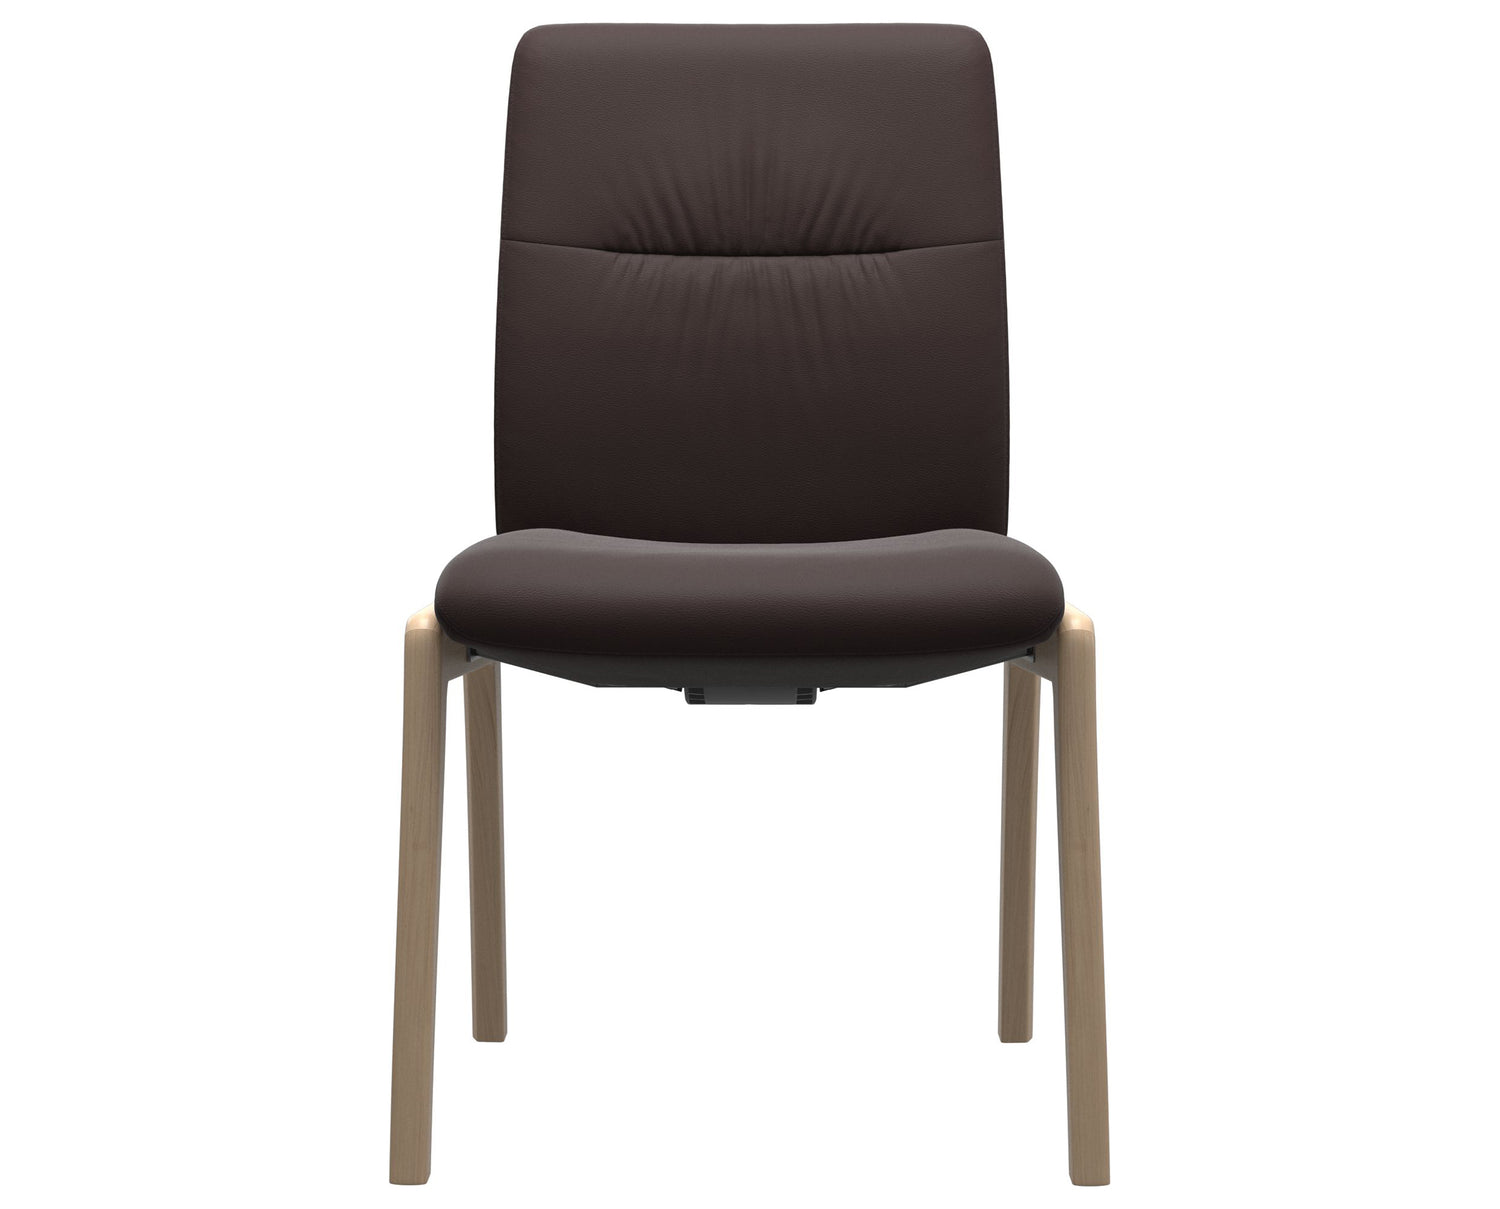 Paloma Leather Chocolate & Natural Base | Stressless Mint Low Back D100 Dining Chair | Valley Ridge Furniture